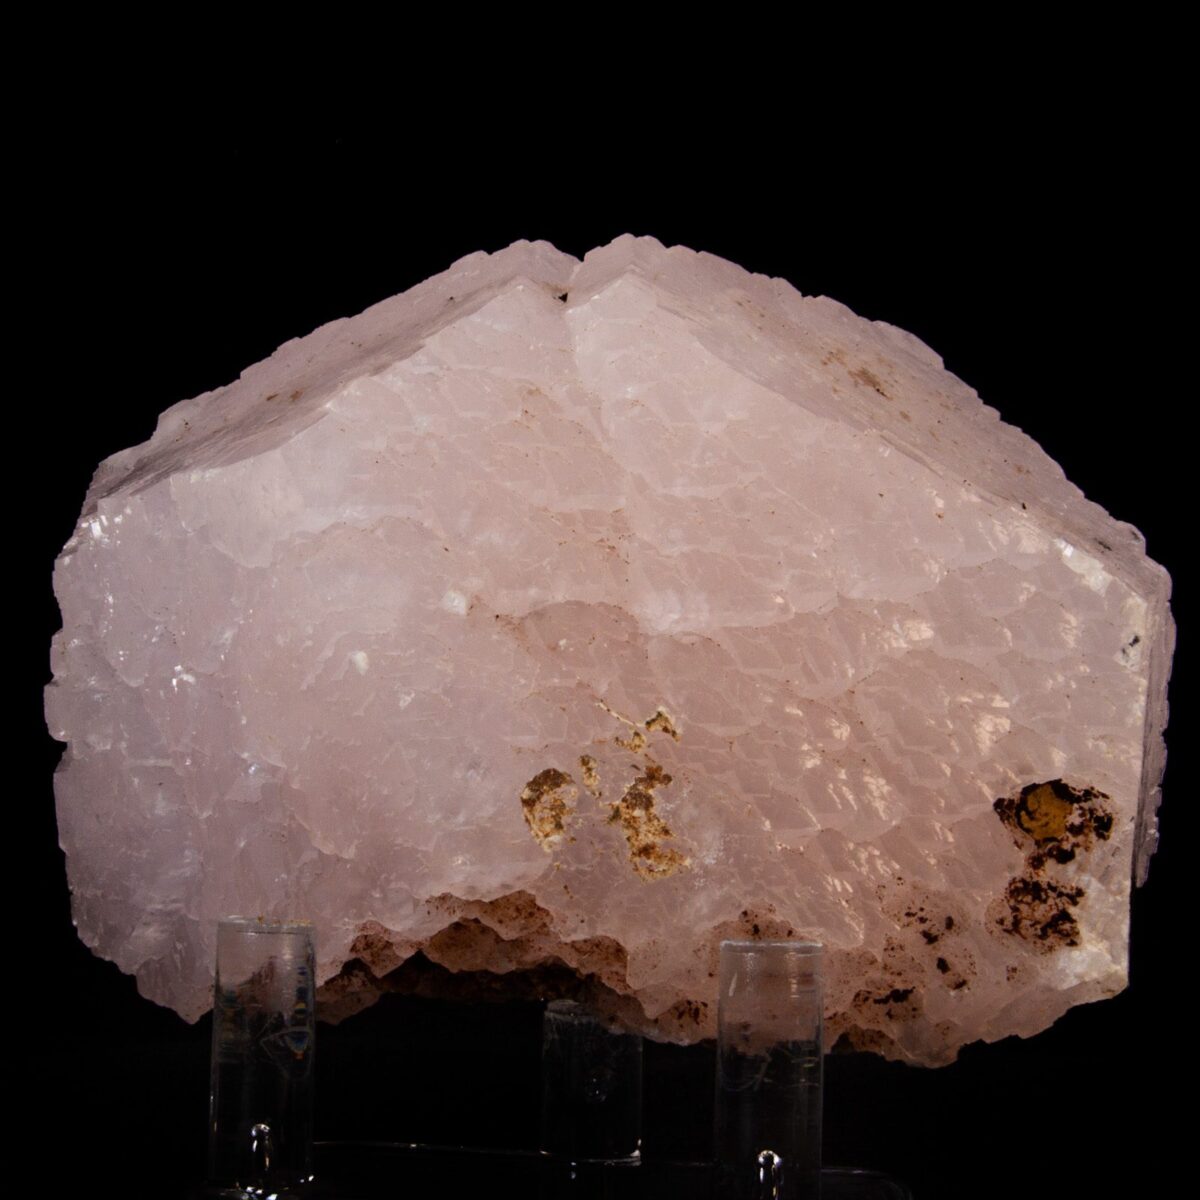 Manganoan Calcite twinned crystals